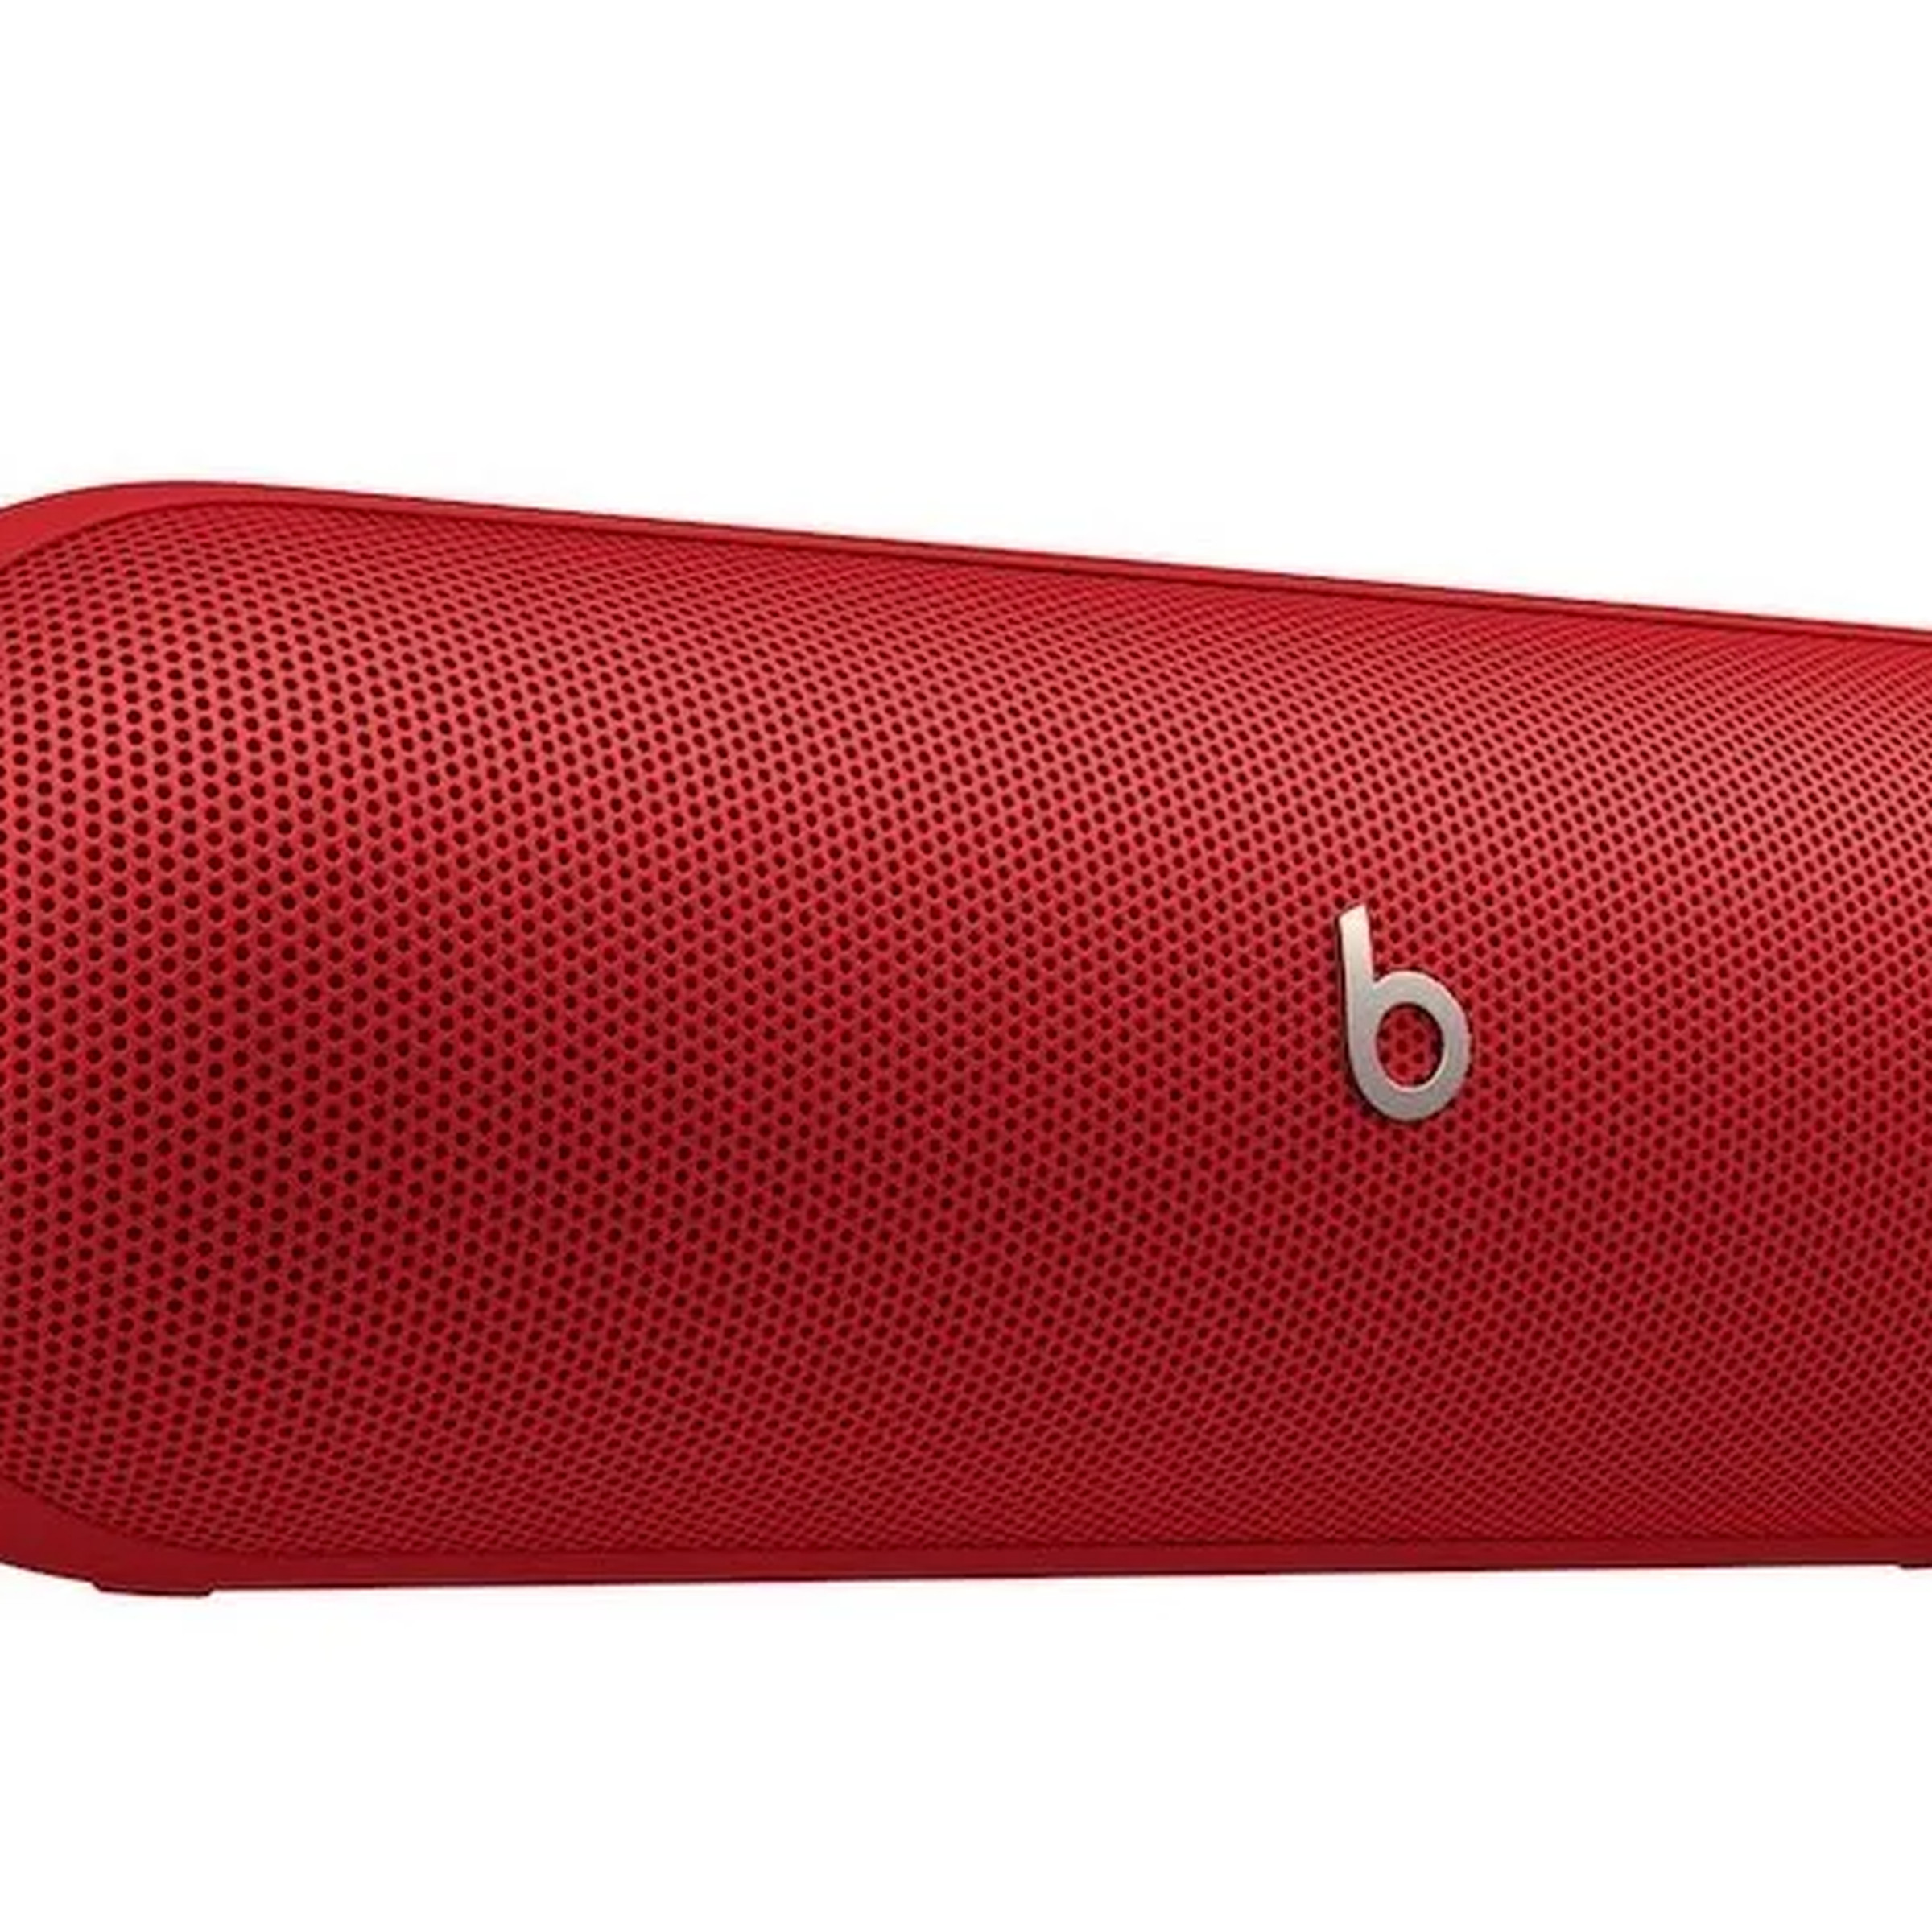 Leaked render of 2024 Beats Pill in red